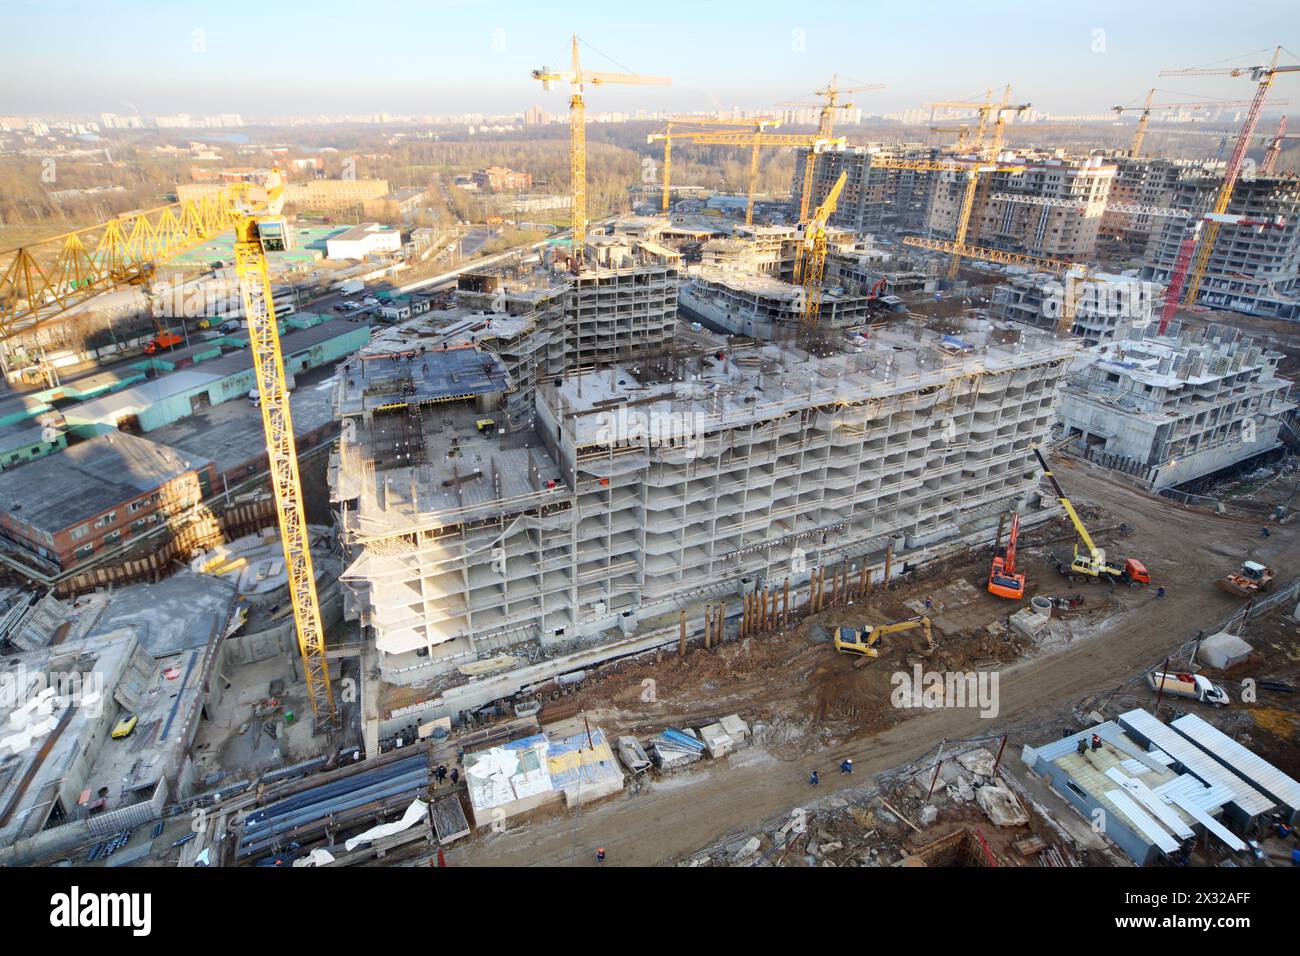 MOSCOW - NOVEMBER 23: Multi-storey buildings under construction in complex Tsaritsino, on November 23, 2012 in Moscow, Russia. Tsaritsino District is Stock Photo